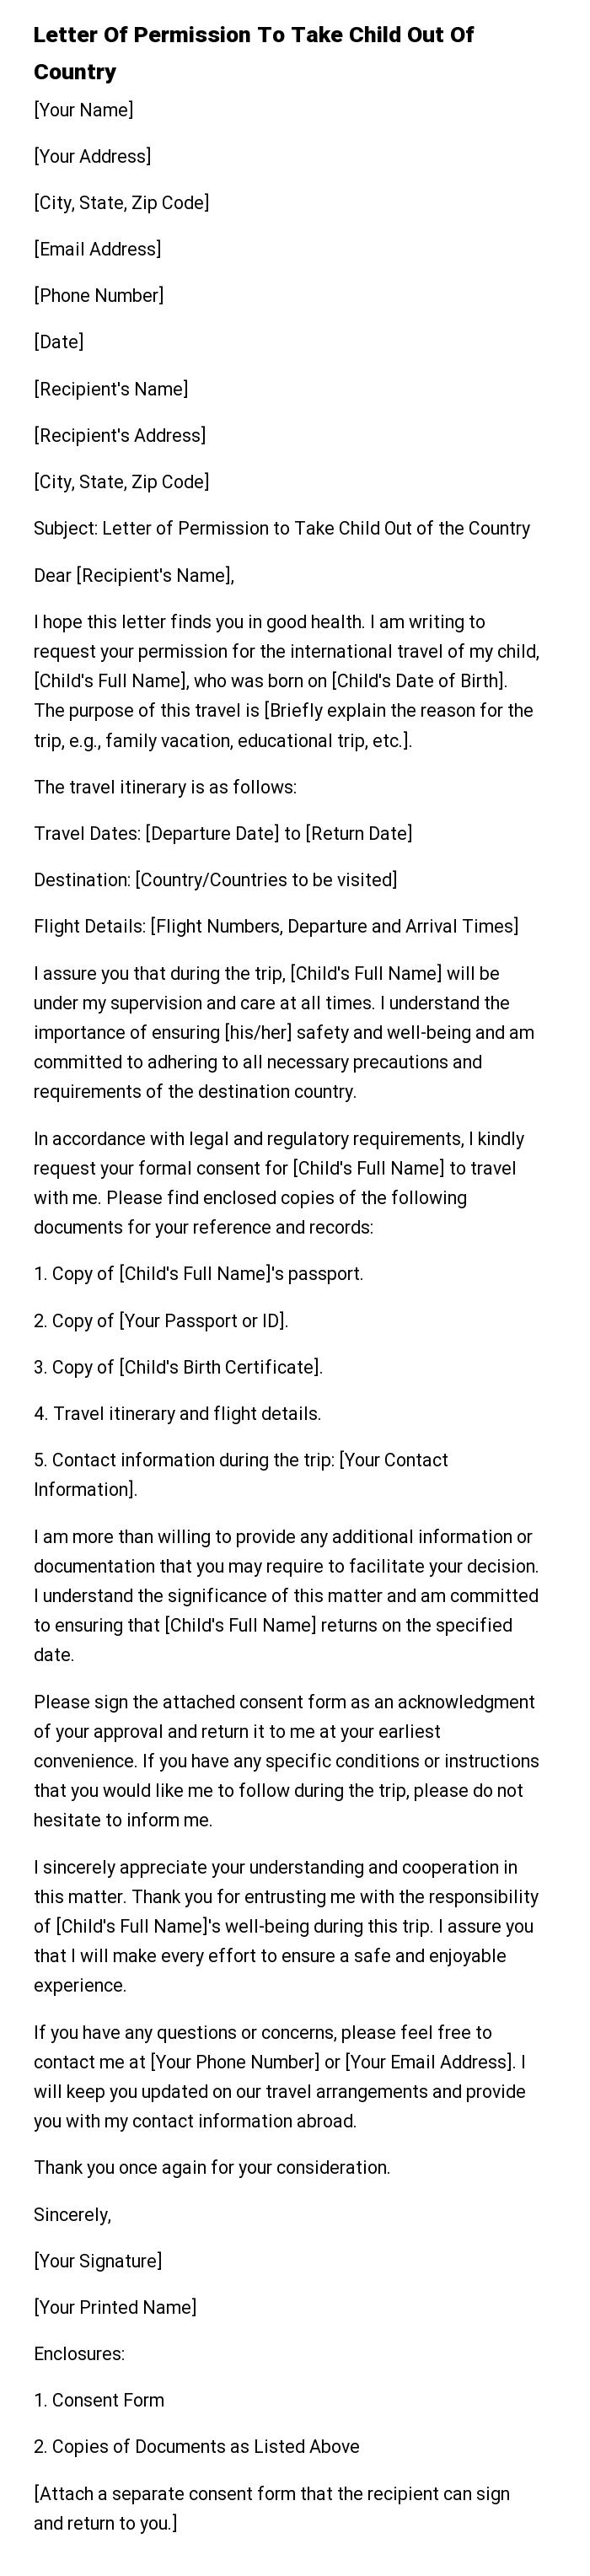 Letter Of Permission To Take Child Out Of Country